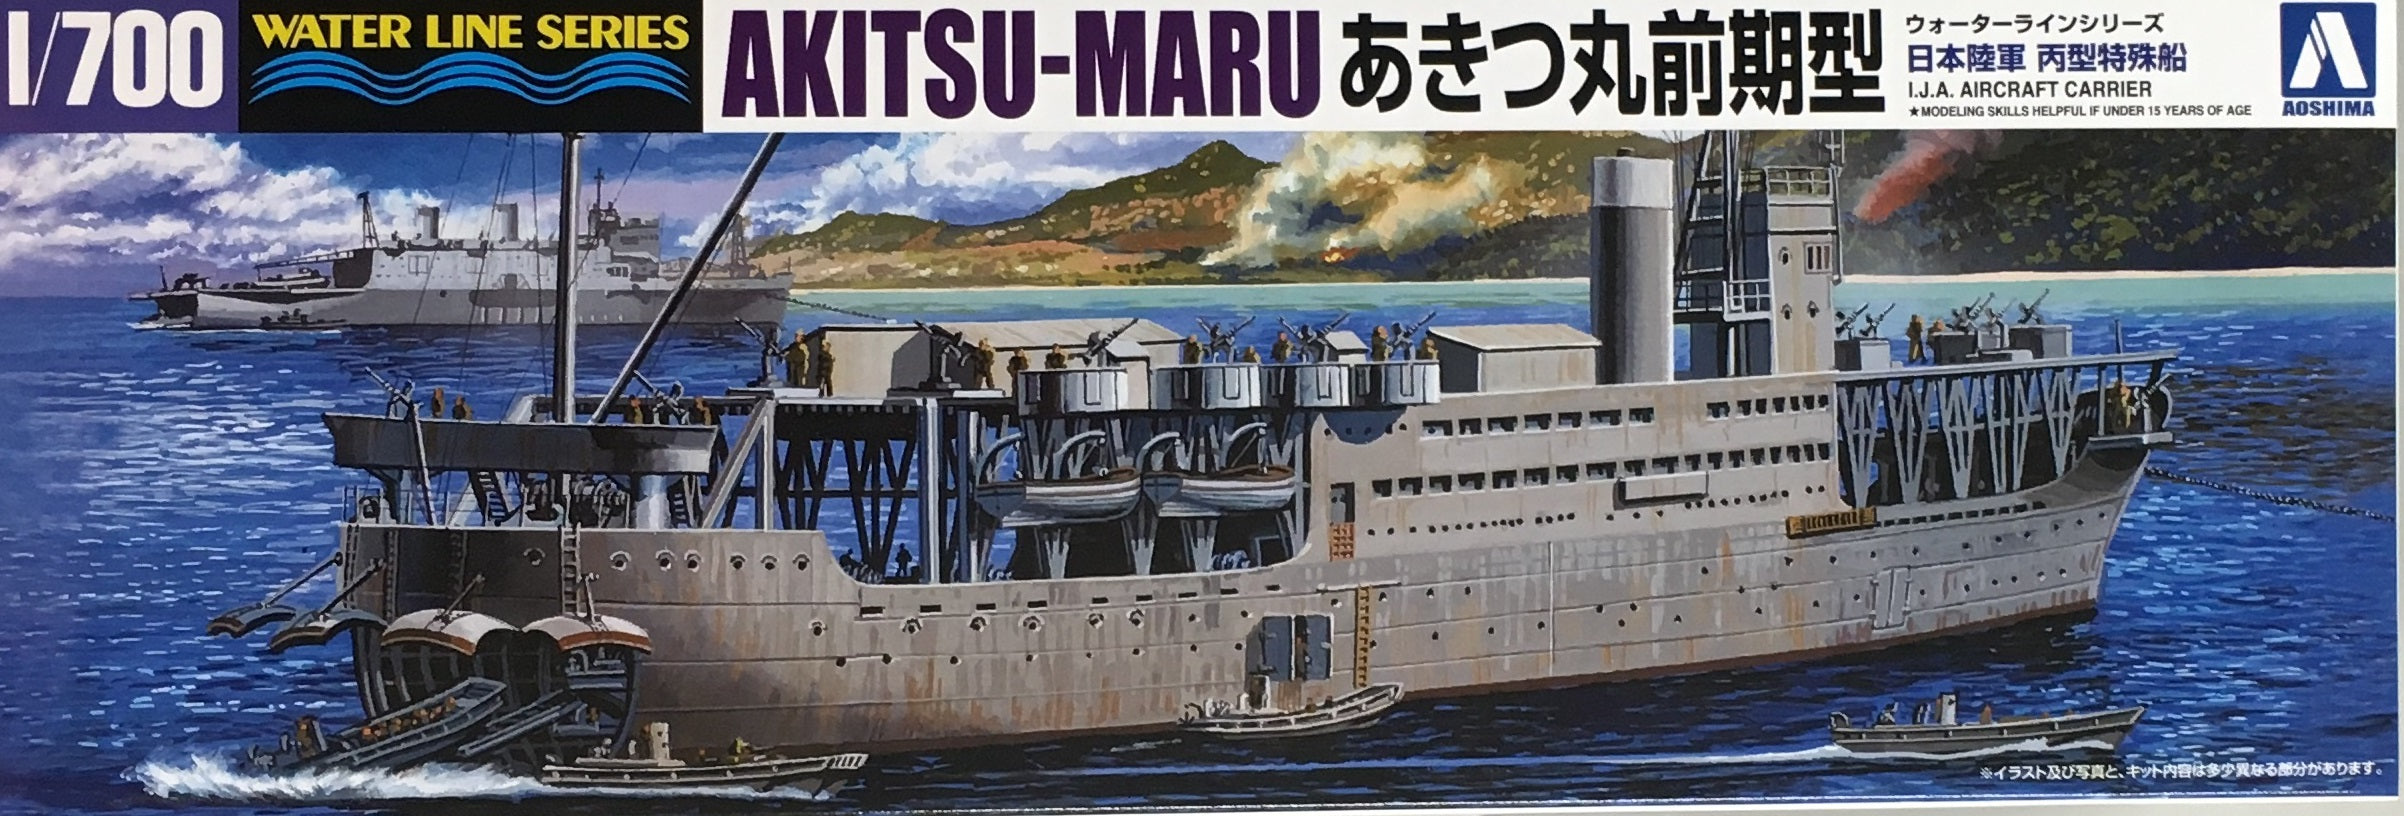 1/700 Limited Imperial Army Hei Type Special Vessels Akitsumaru